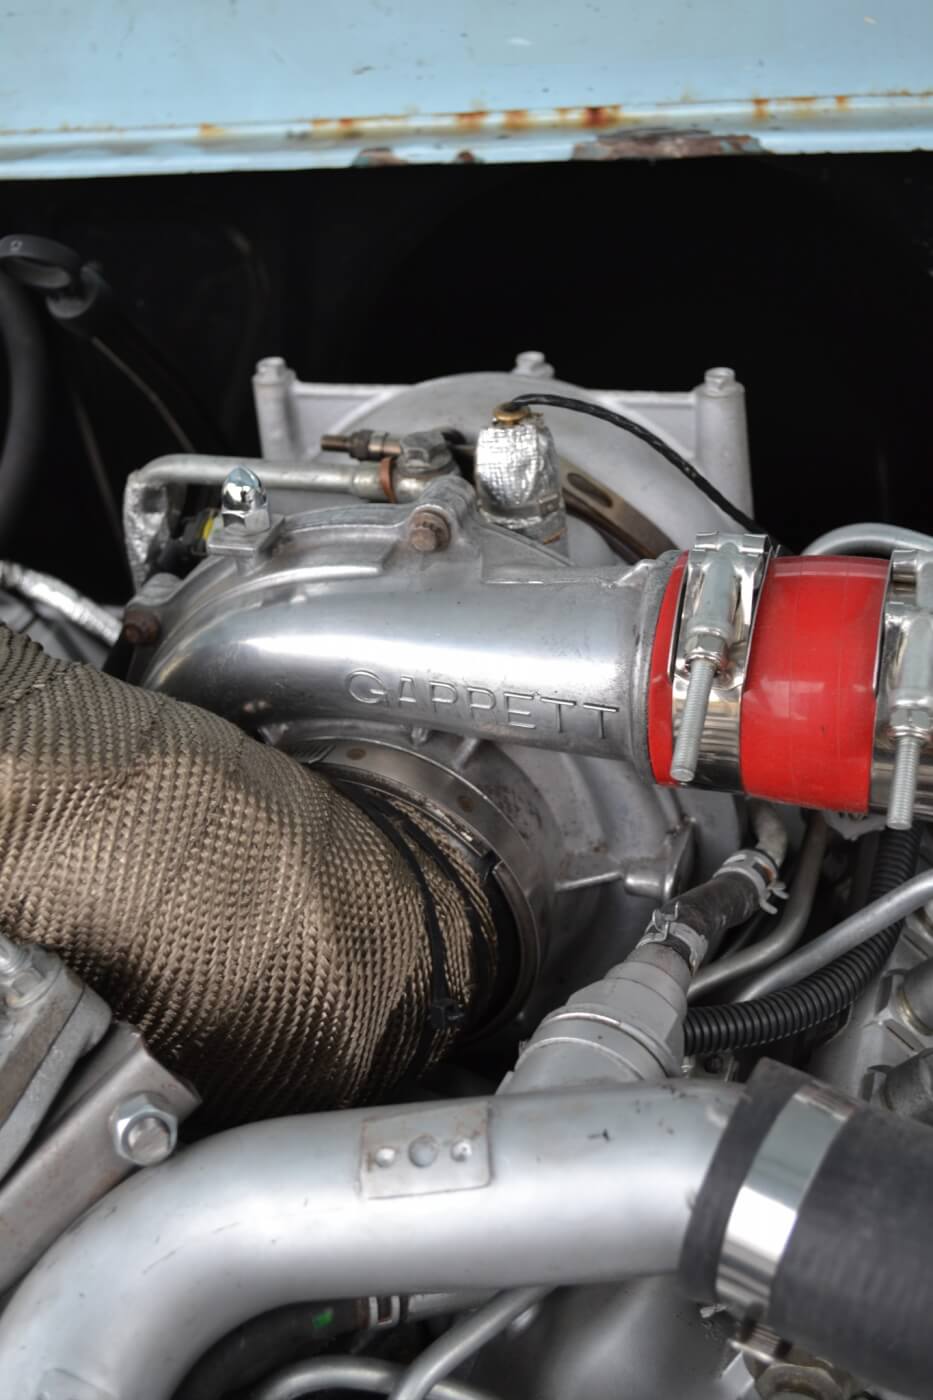 The stock Garrett turbocharger has been upgraded with bright red silicone boots and a heat-wrapped intake, but otherwise is stock, and puts out around 25 to 30psi of boost.